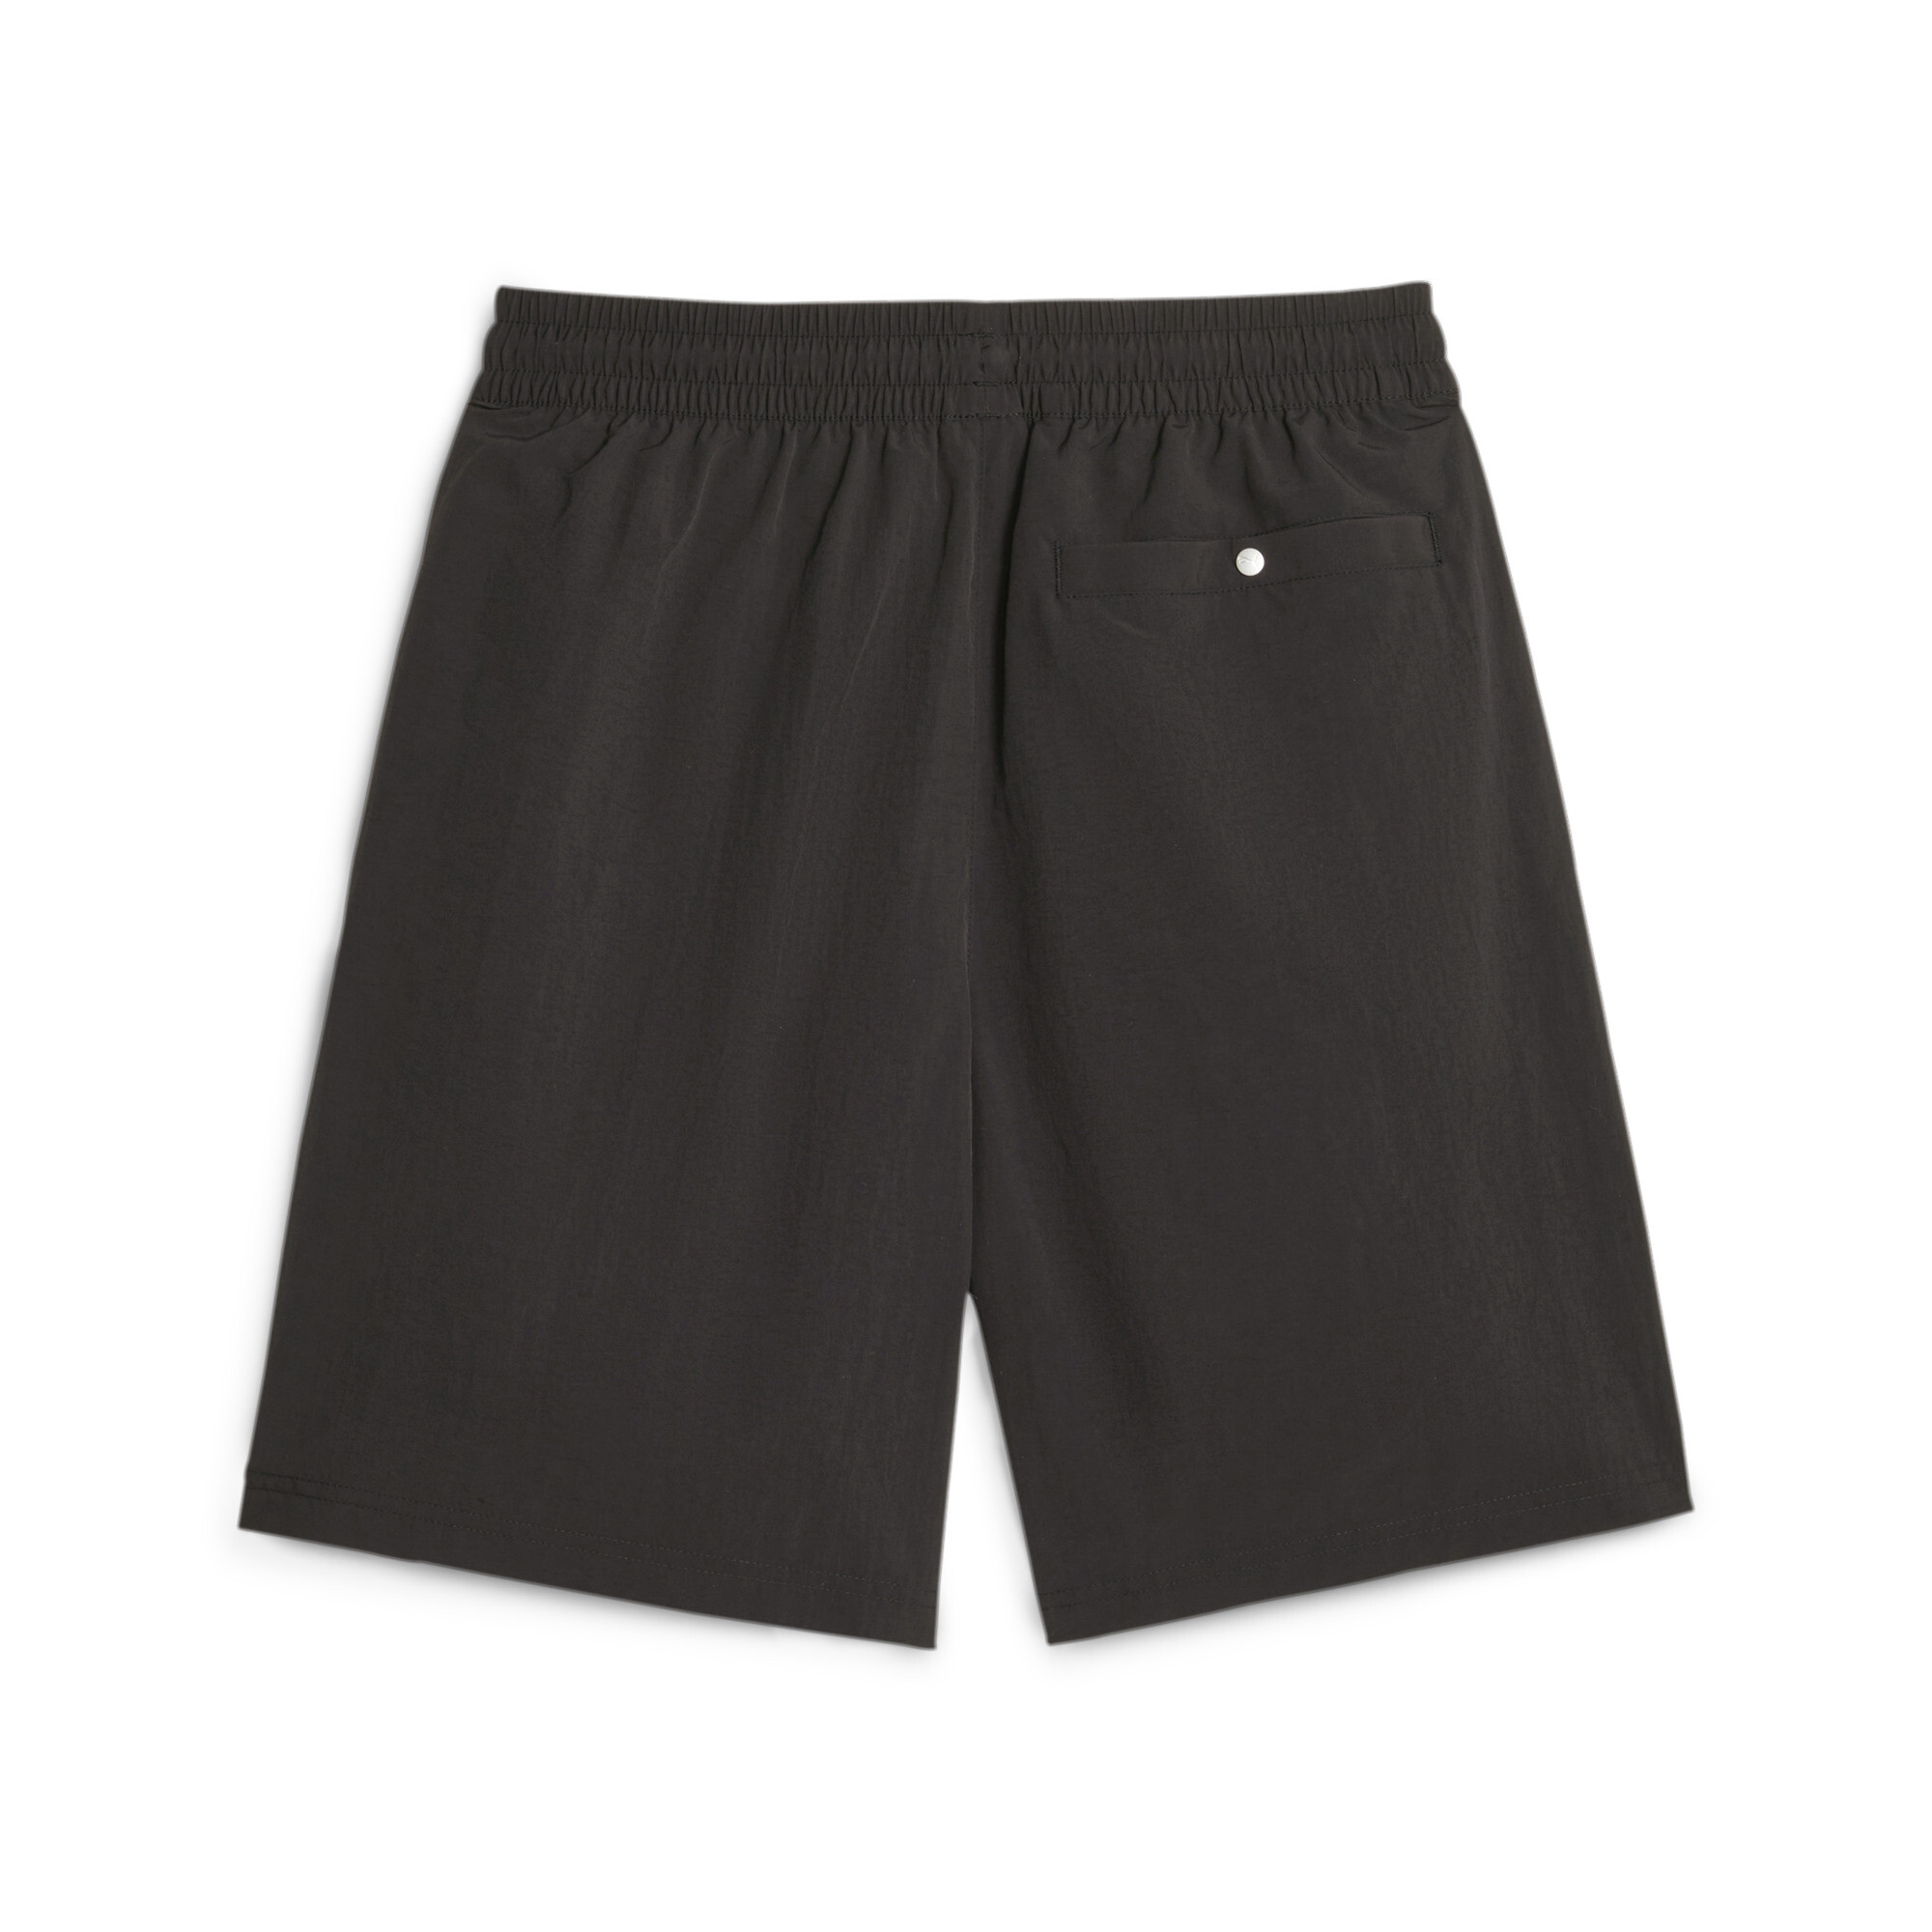 Men's PUMA TEAM Relaxed Shorts In Black, Size XS